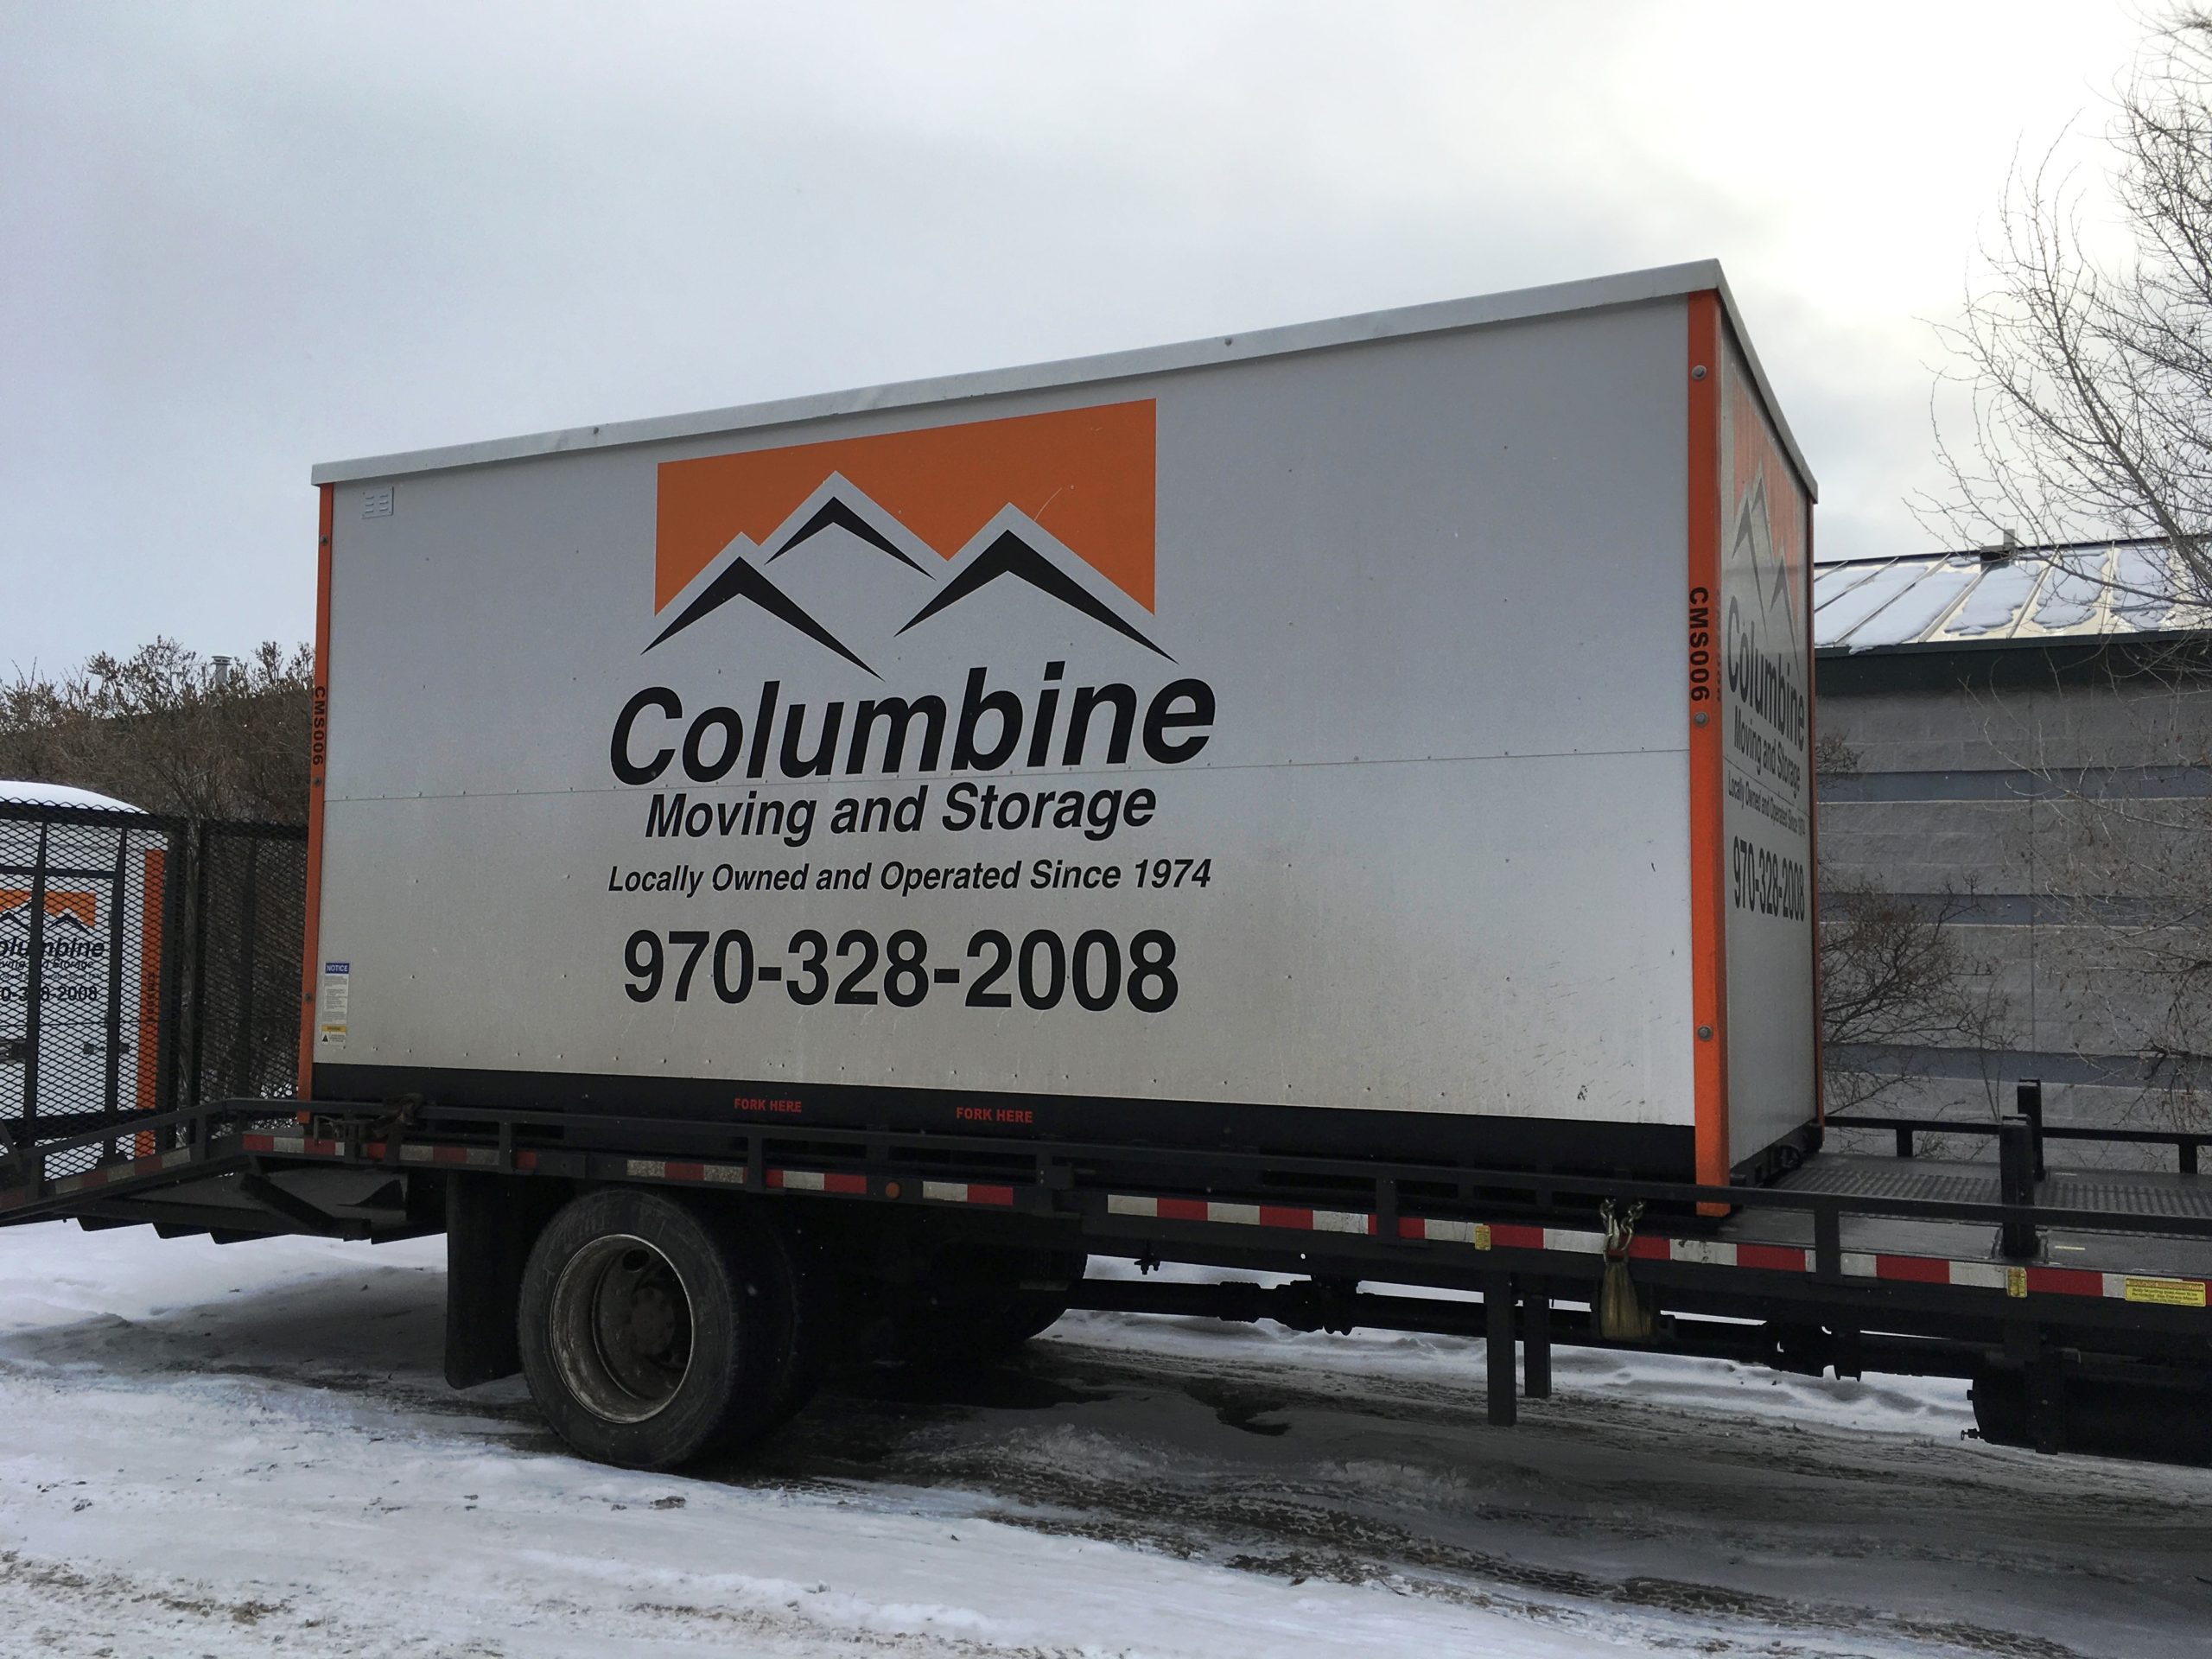 https://columbinemoving.com/wp-content/uploads/2020/10/Portable-Storage-Container_Snow-scaled-1.jpg